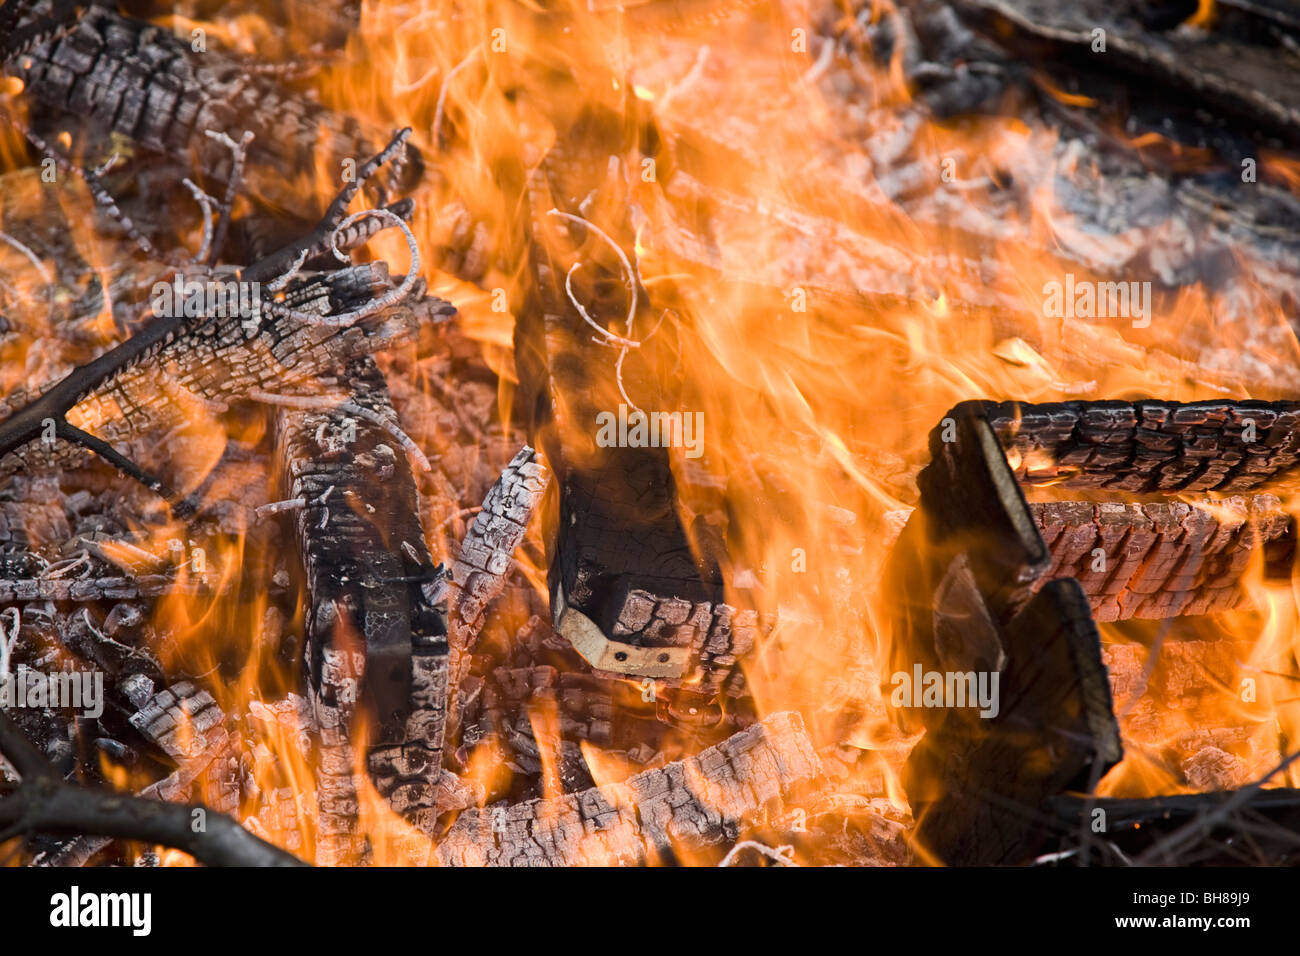 Detail of a forest fire Stock Photo